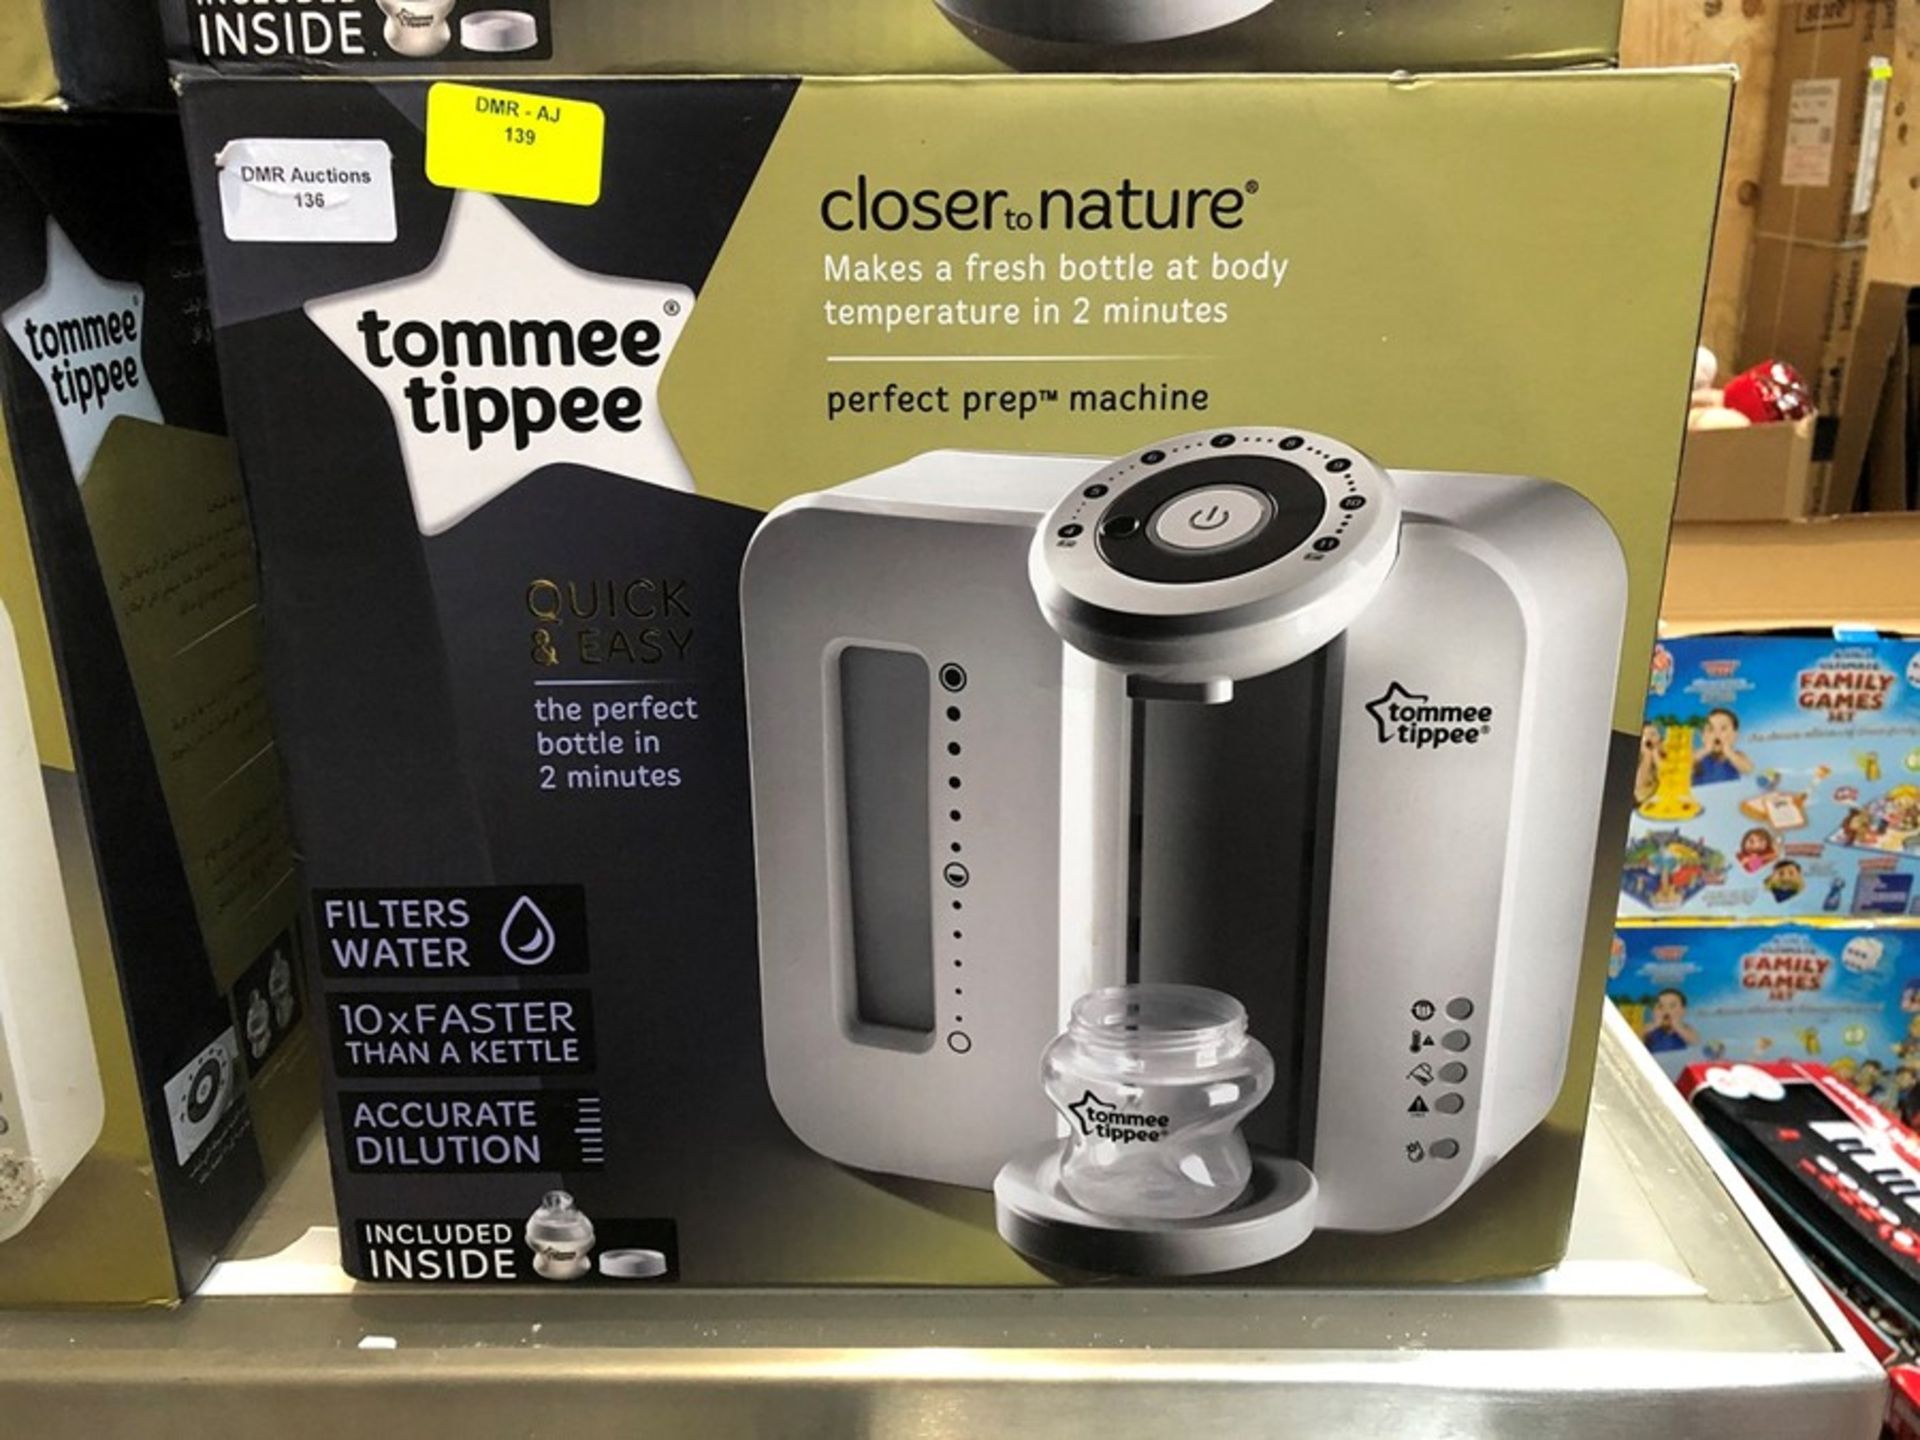 1 BOXED TOMMEE TIPPEE CLOSER TO NATURE PERFECT PREP MACHINE PUBLIC VIEWING AVAILABLE & HIGHLY